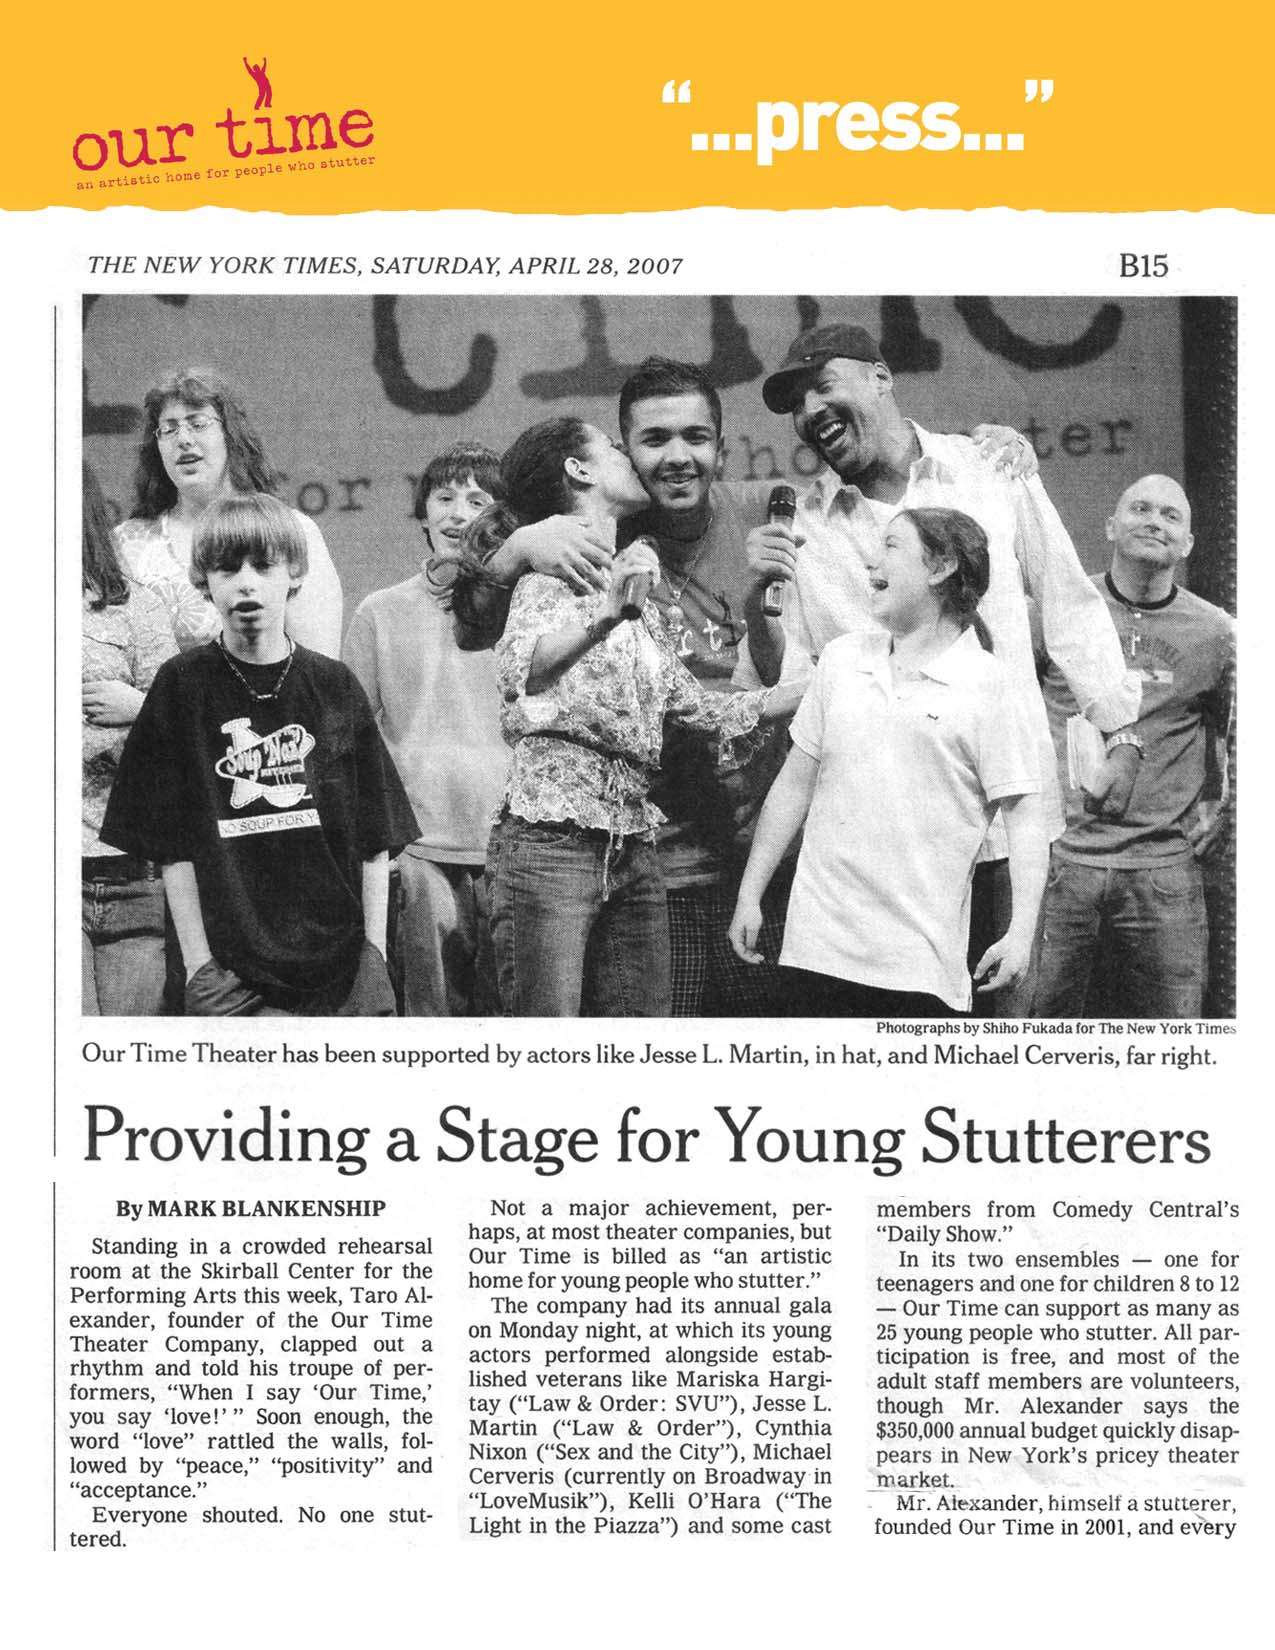 Providing a Stage for Young Stutterers